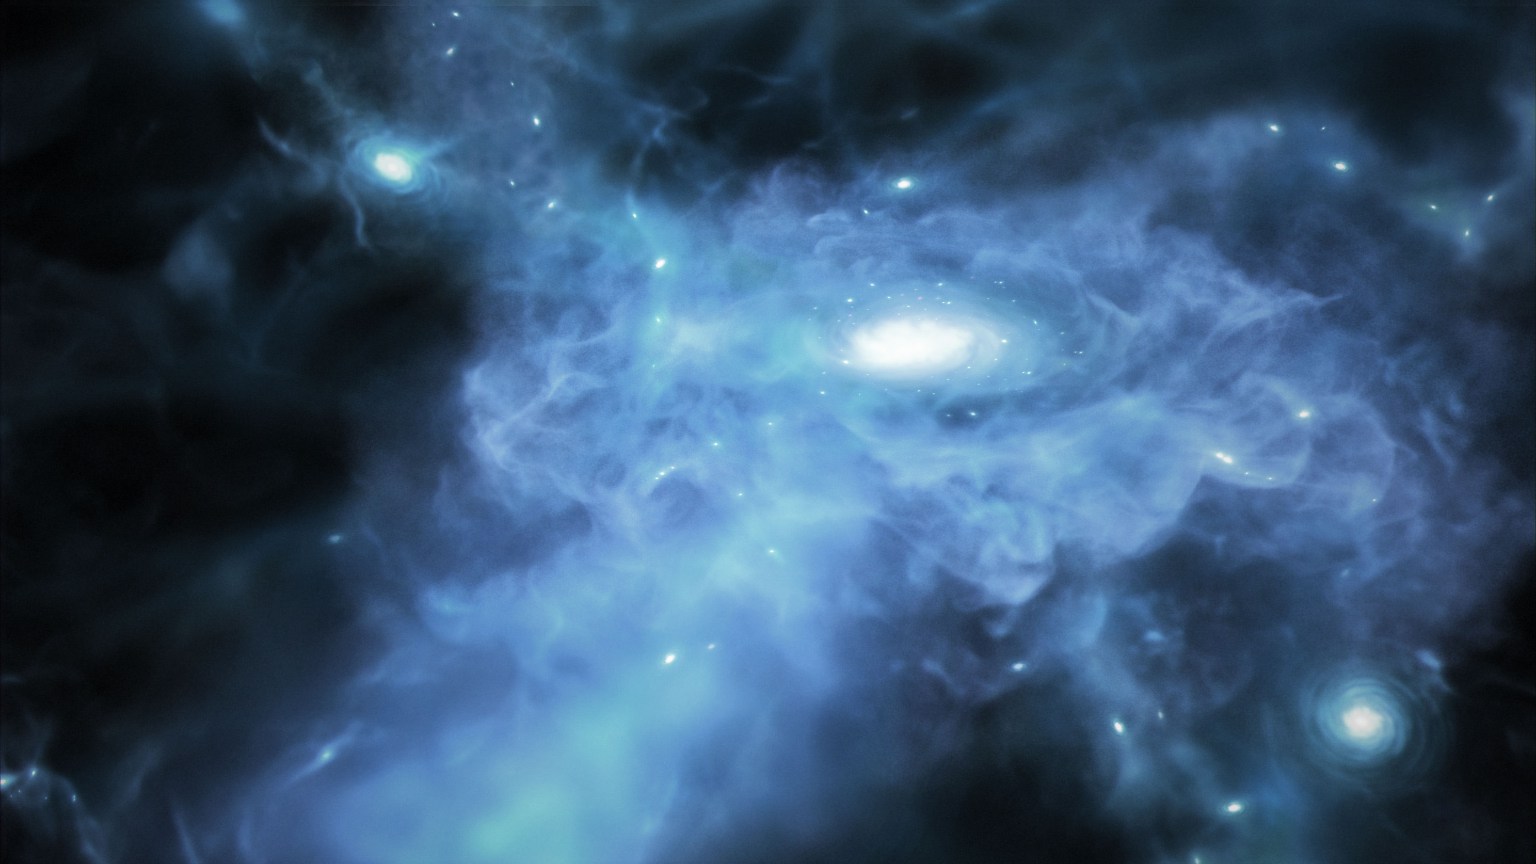 This illustration is awash in bright blues, with only areas of the black background of space peeking out near the edges. Just above center is a large white spiral galaxy that is forming within a large cloud of blue gas. Its spiral arms twirl clockwise. Immediately around the galaxy's edges are larger light blue dots. The gas appears thicker and brighter blue below the galaxy and toward the bottom left in what looks like a loose, extended column. Other wispy blue gas appears all around the galaxy, extending to every edge of the illustration. There are two additional spiral galaxies, though they are about half the size of the one at the center. They appear toward the top left and bottom right, and both are connected to regions of blue gas. Several bright knots dot the brightest blue areas near the center, and toward the top right. The background is clearer and more obviously black along a wider area at the left edge, a sliver along the top right, and in triangles toward the bottom right corner.